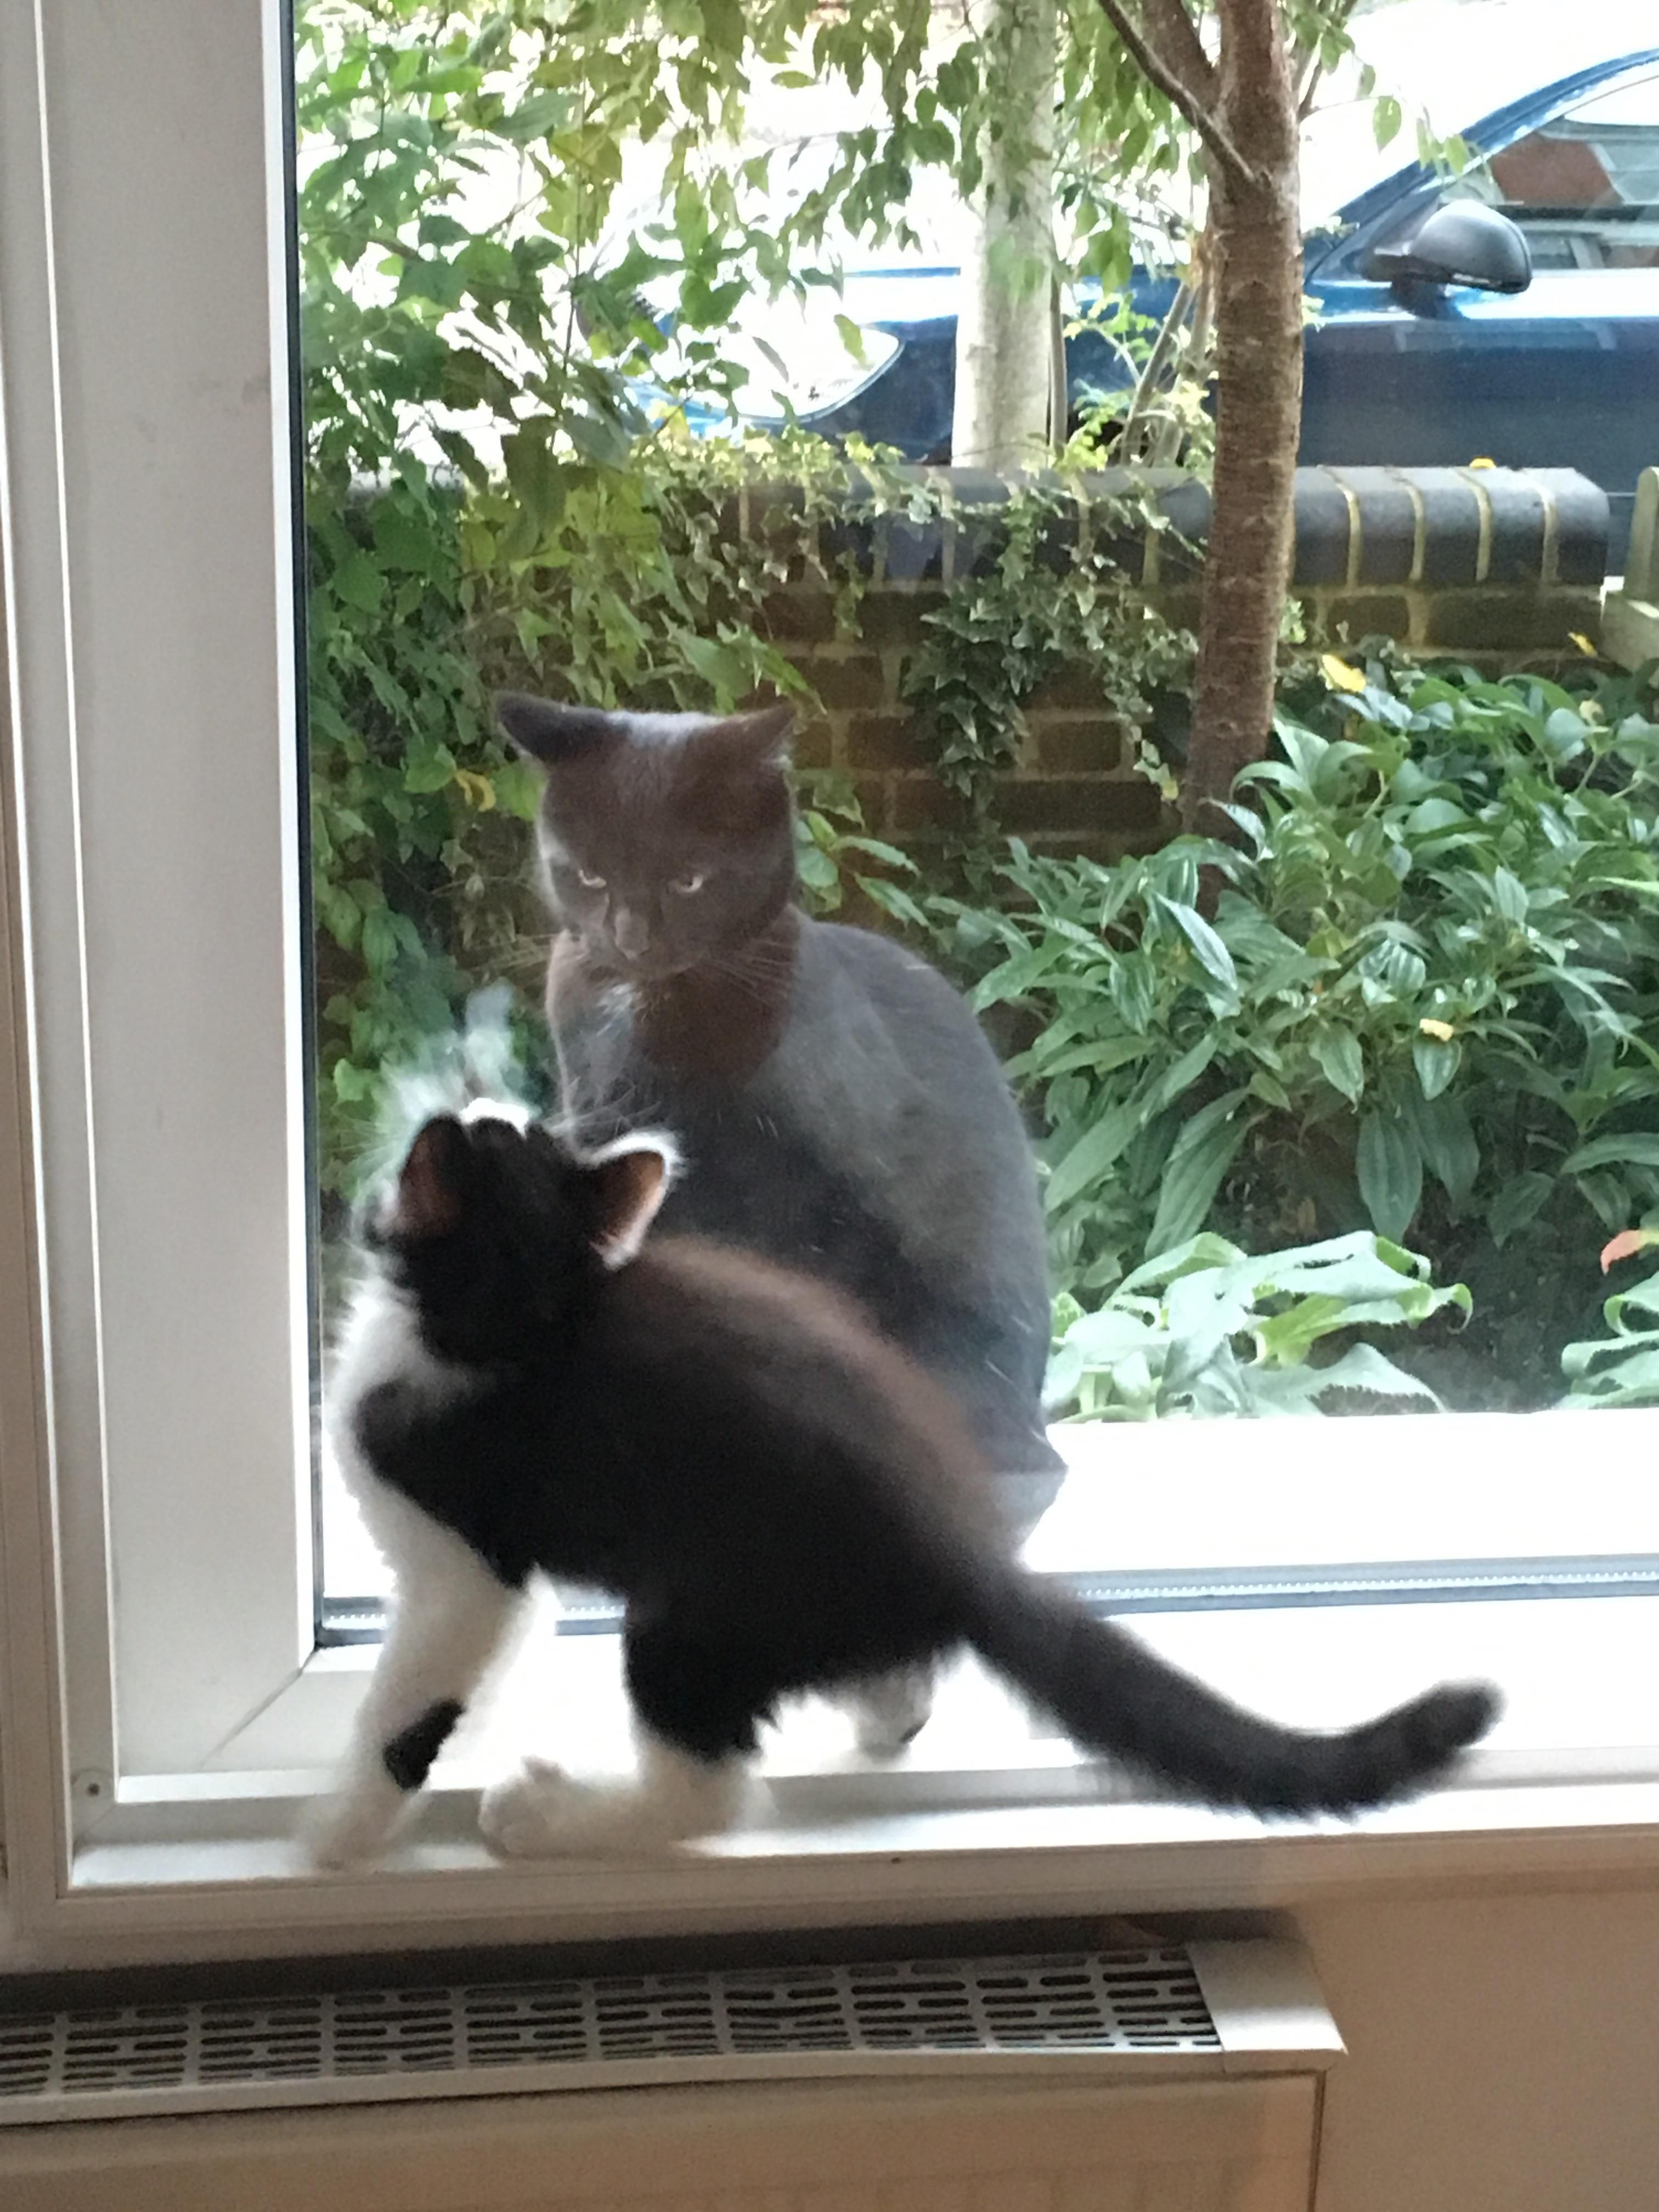 My new kitten just met the cat next door who seems to want to harvest her soul.